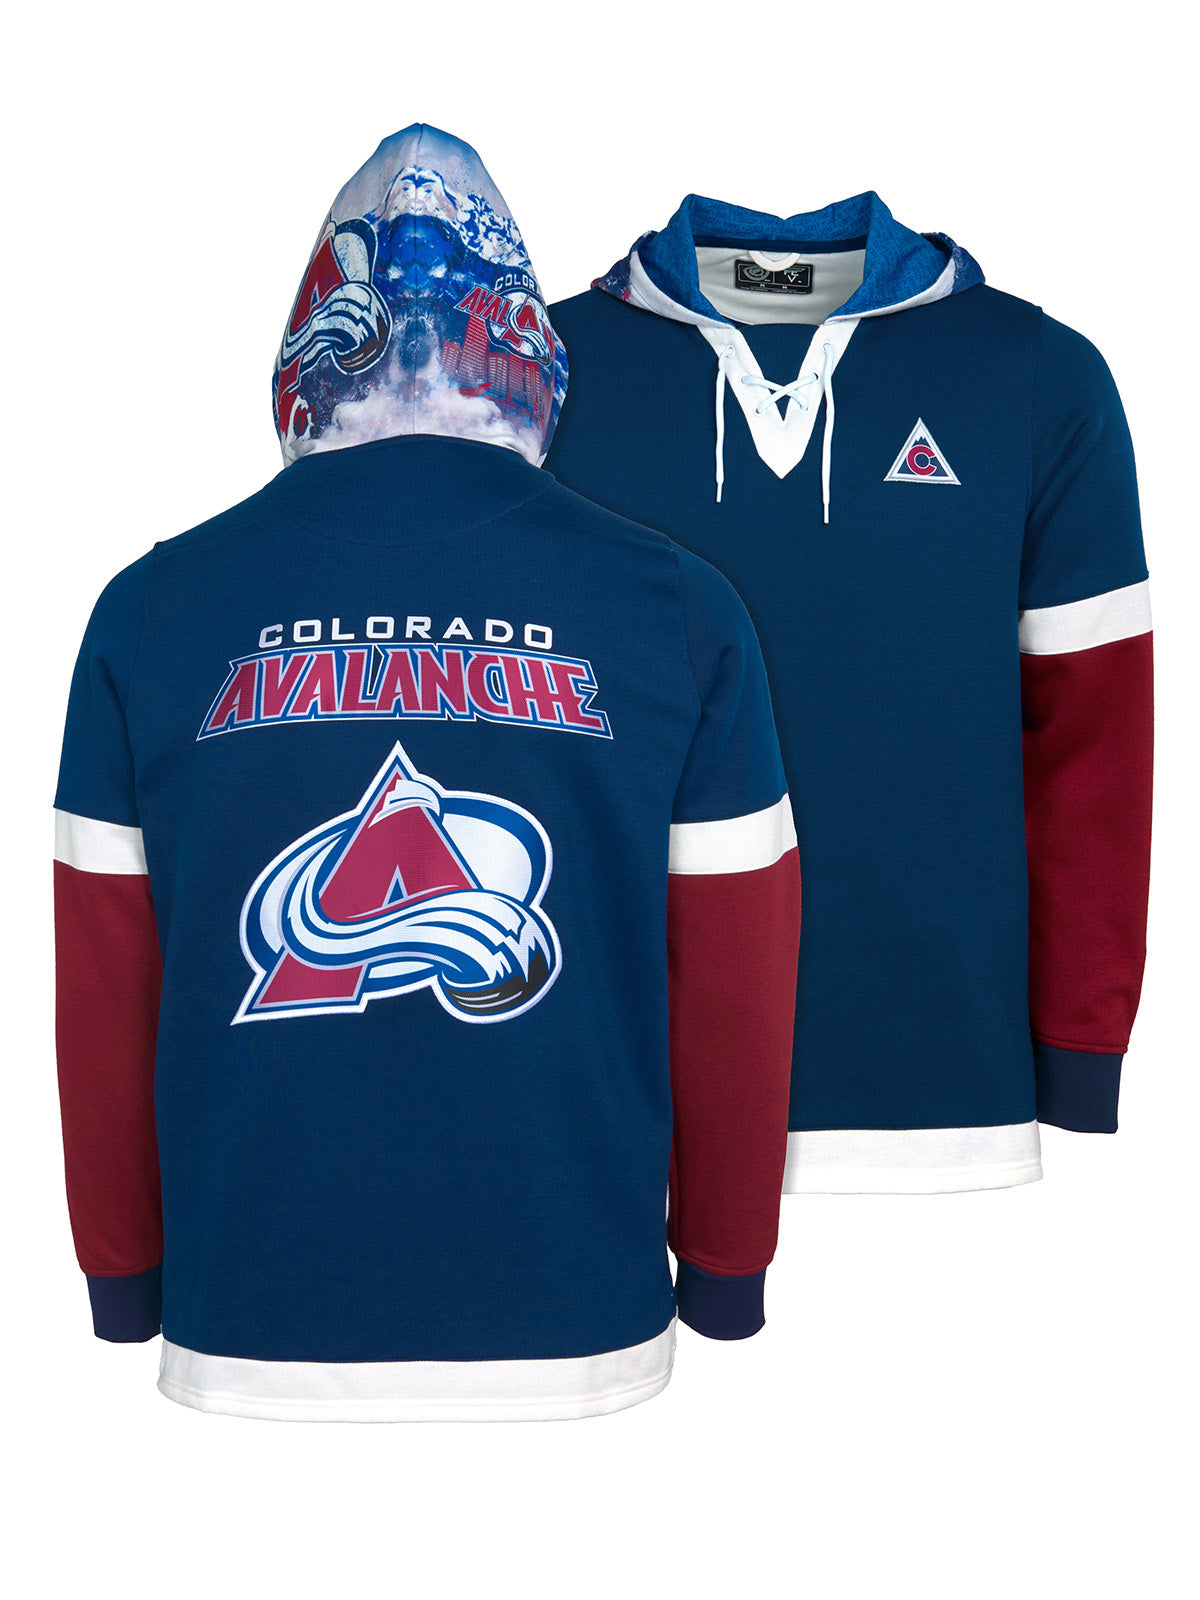 Colorado Avalanche Lace-Up Hoodie - Hand drawn custom hood designs with  all the team colors and craftmanship to replicate the gameday jersey of this NHL hoodie